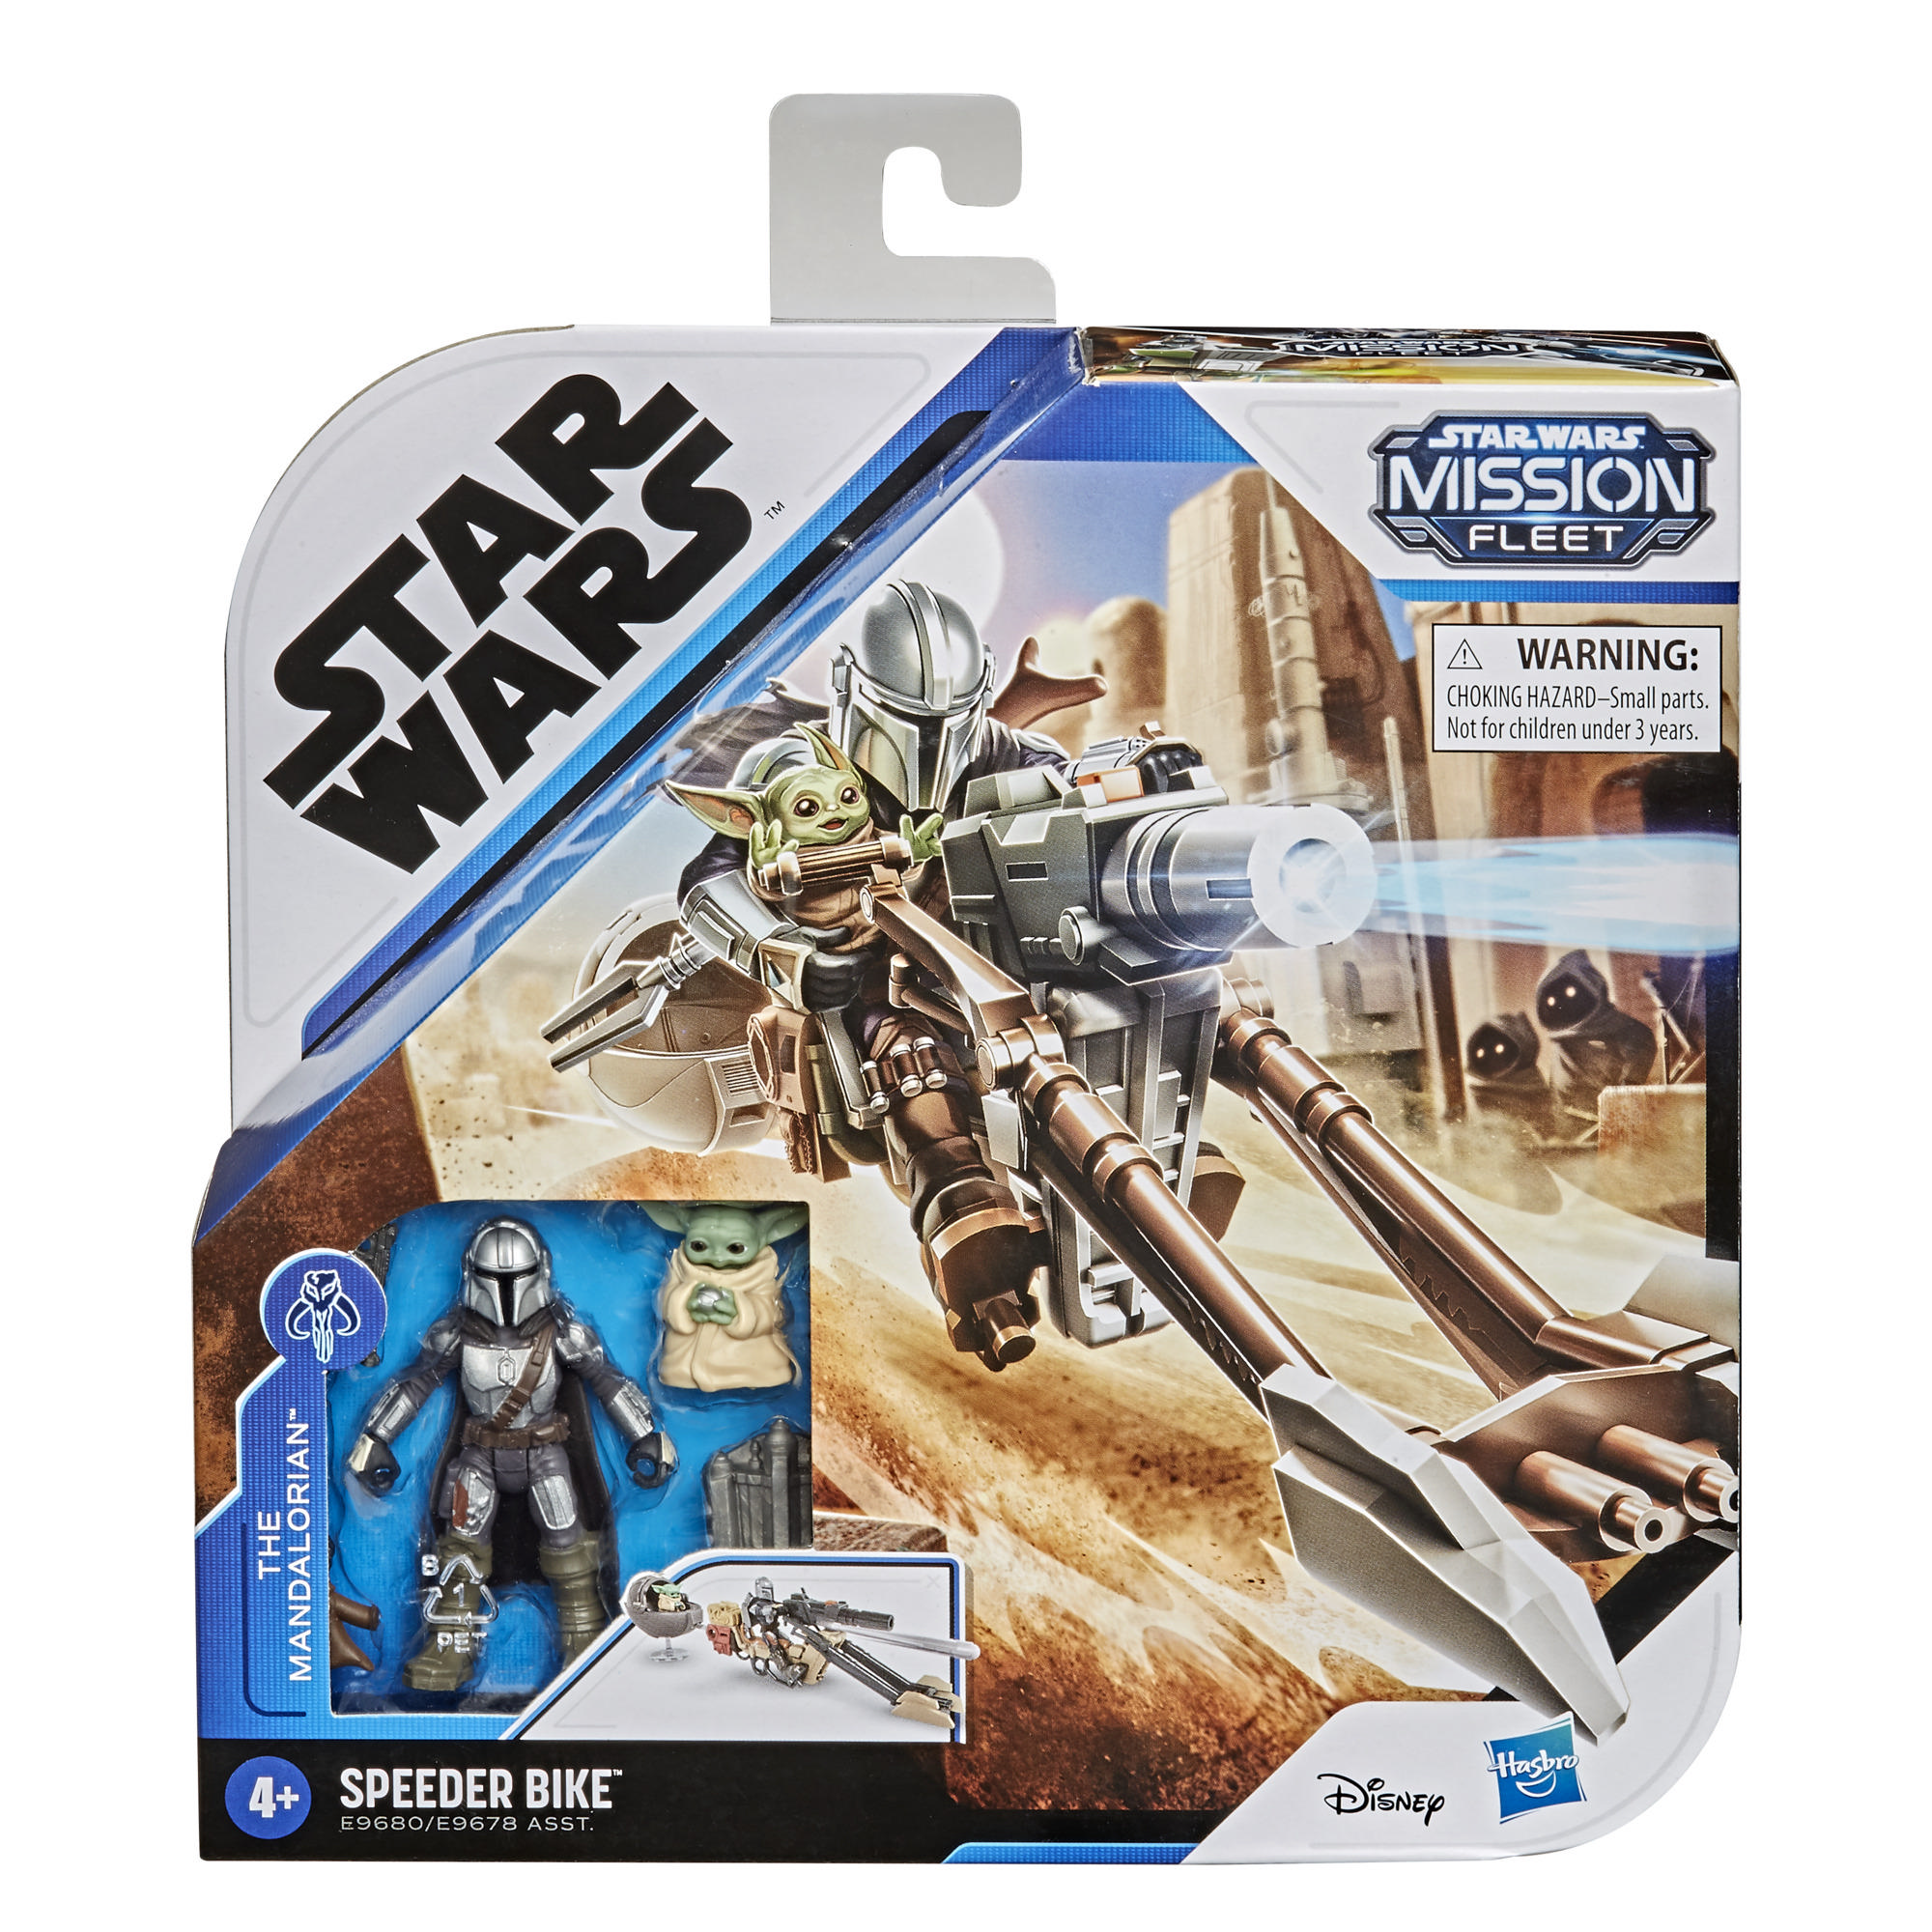 Star Wars Mission Fleet Expedition Class The Mandalorian Action Figure for sale online 